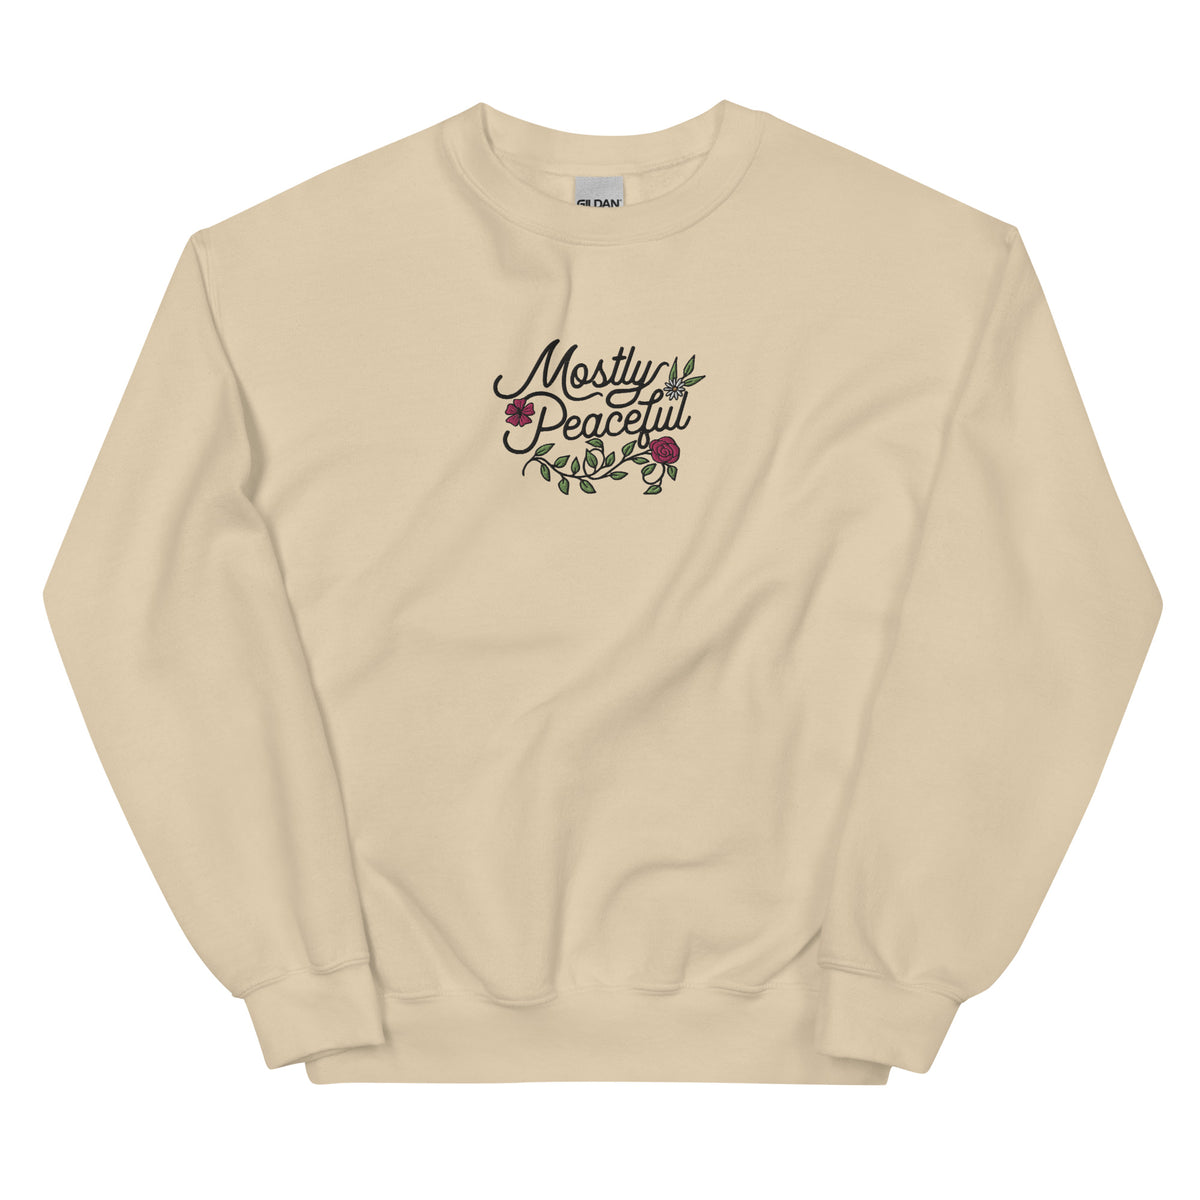 Mostly Peaceful Embroidered Floral Sweatshirt